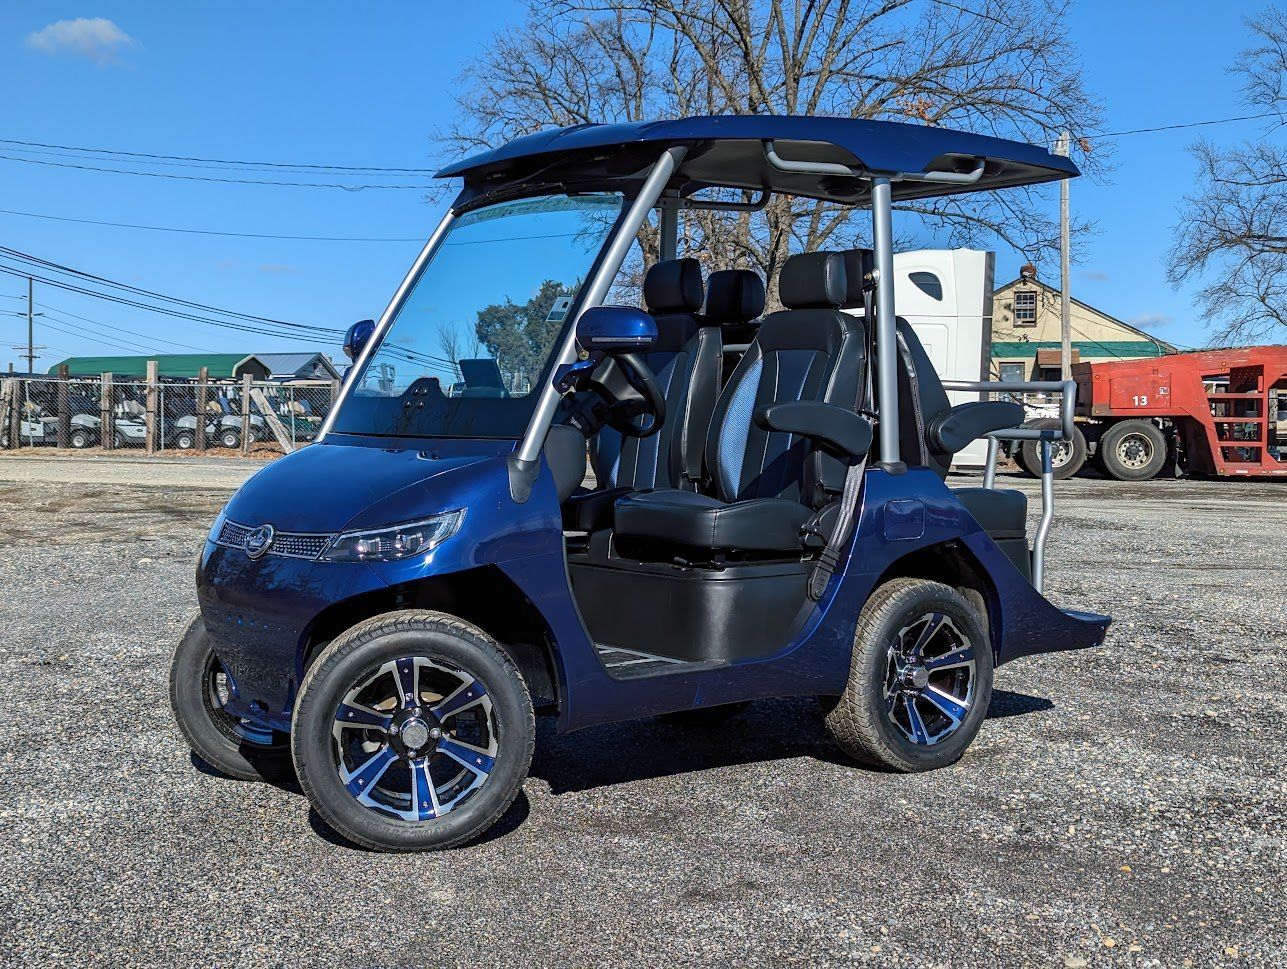 Services & Products United Metro Golf Cart in Brandywine MD